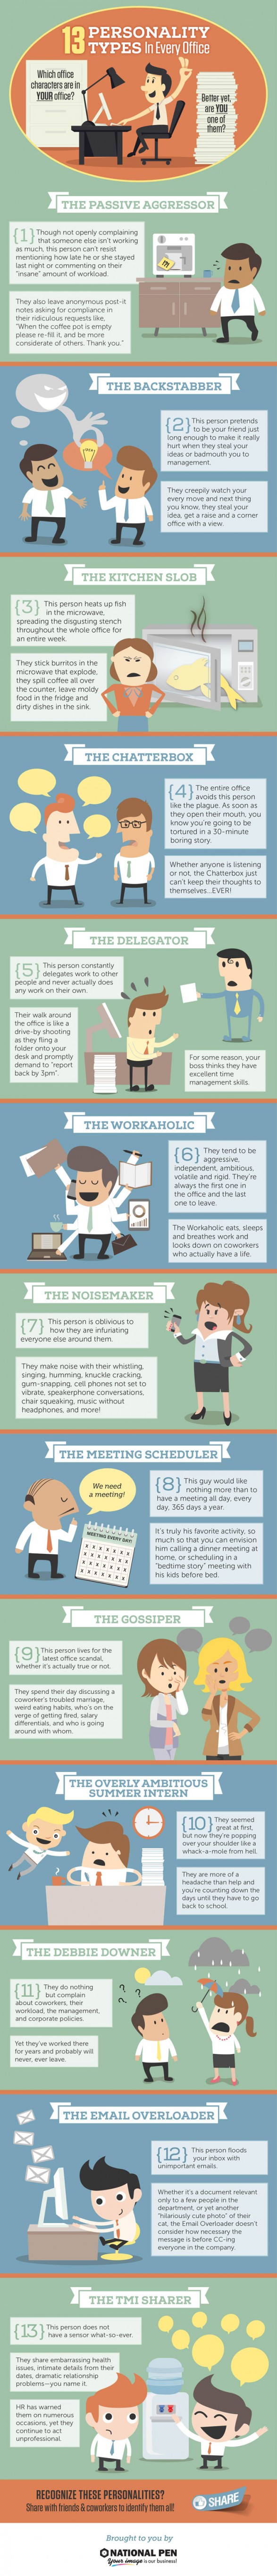 13 types of office personalities